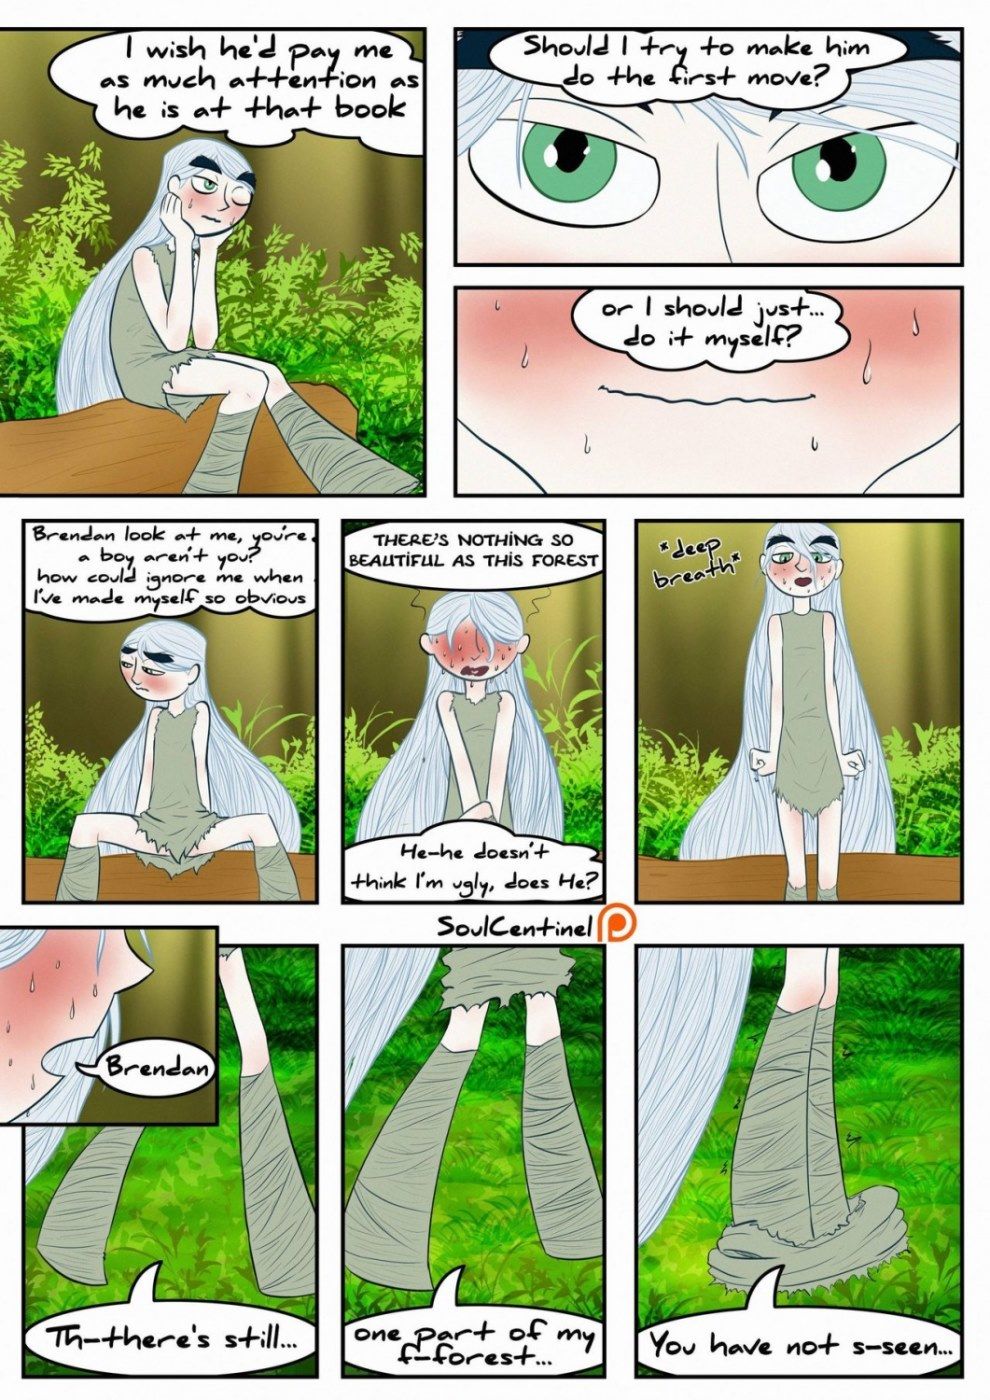 Direct Approach- The Secret of Kells page 1